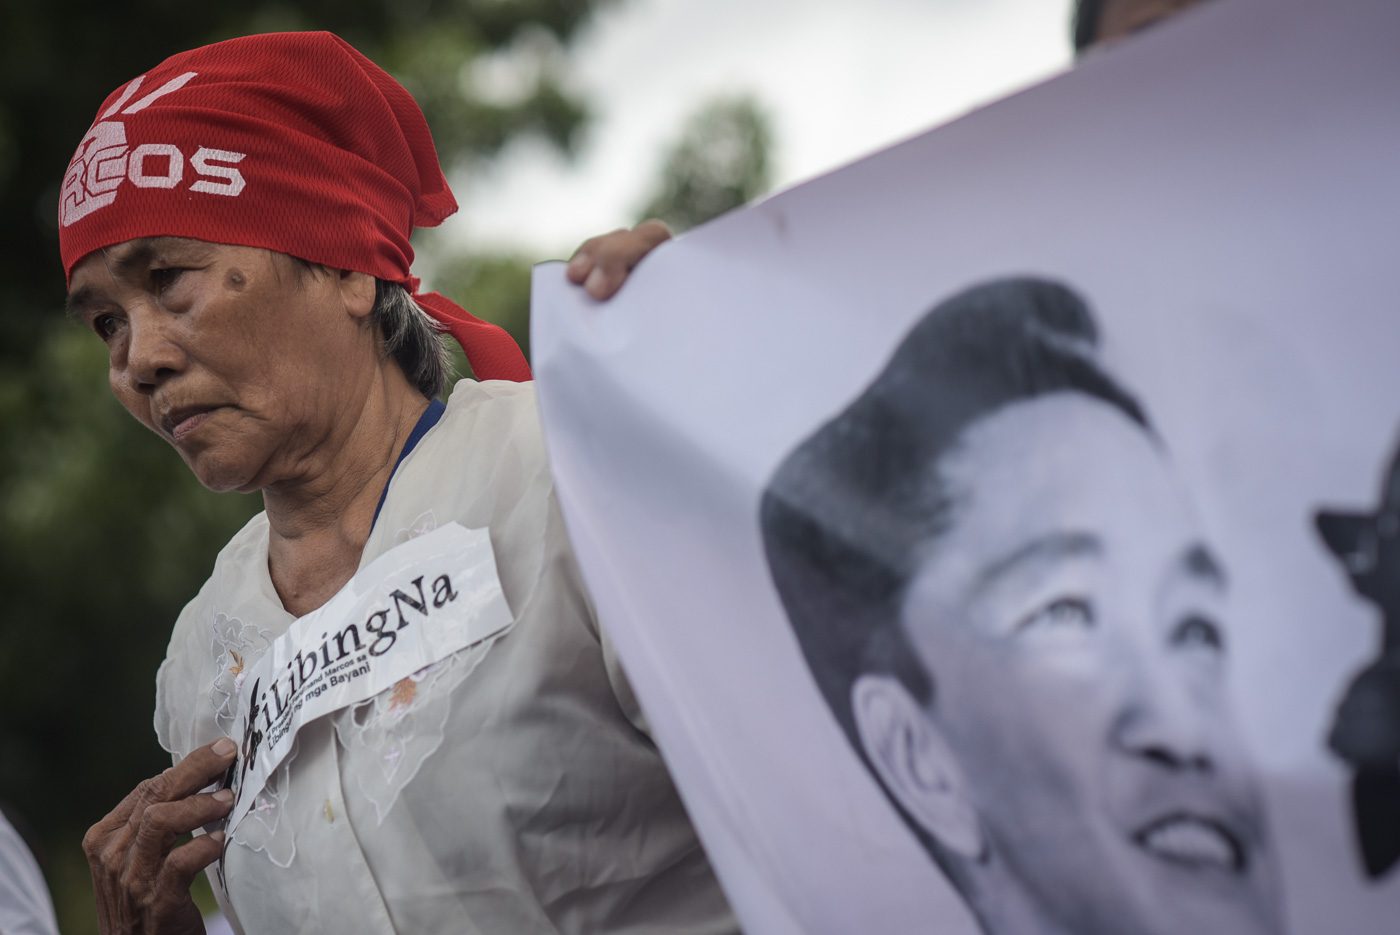 Palace on Marcos burial ruling: Time to move forward